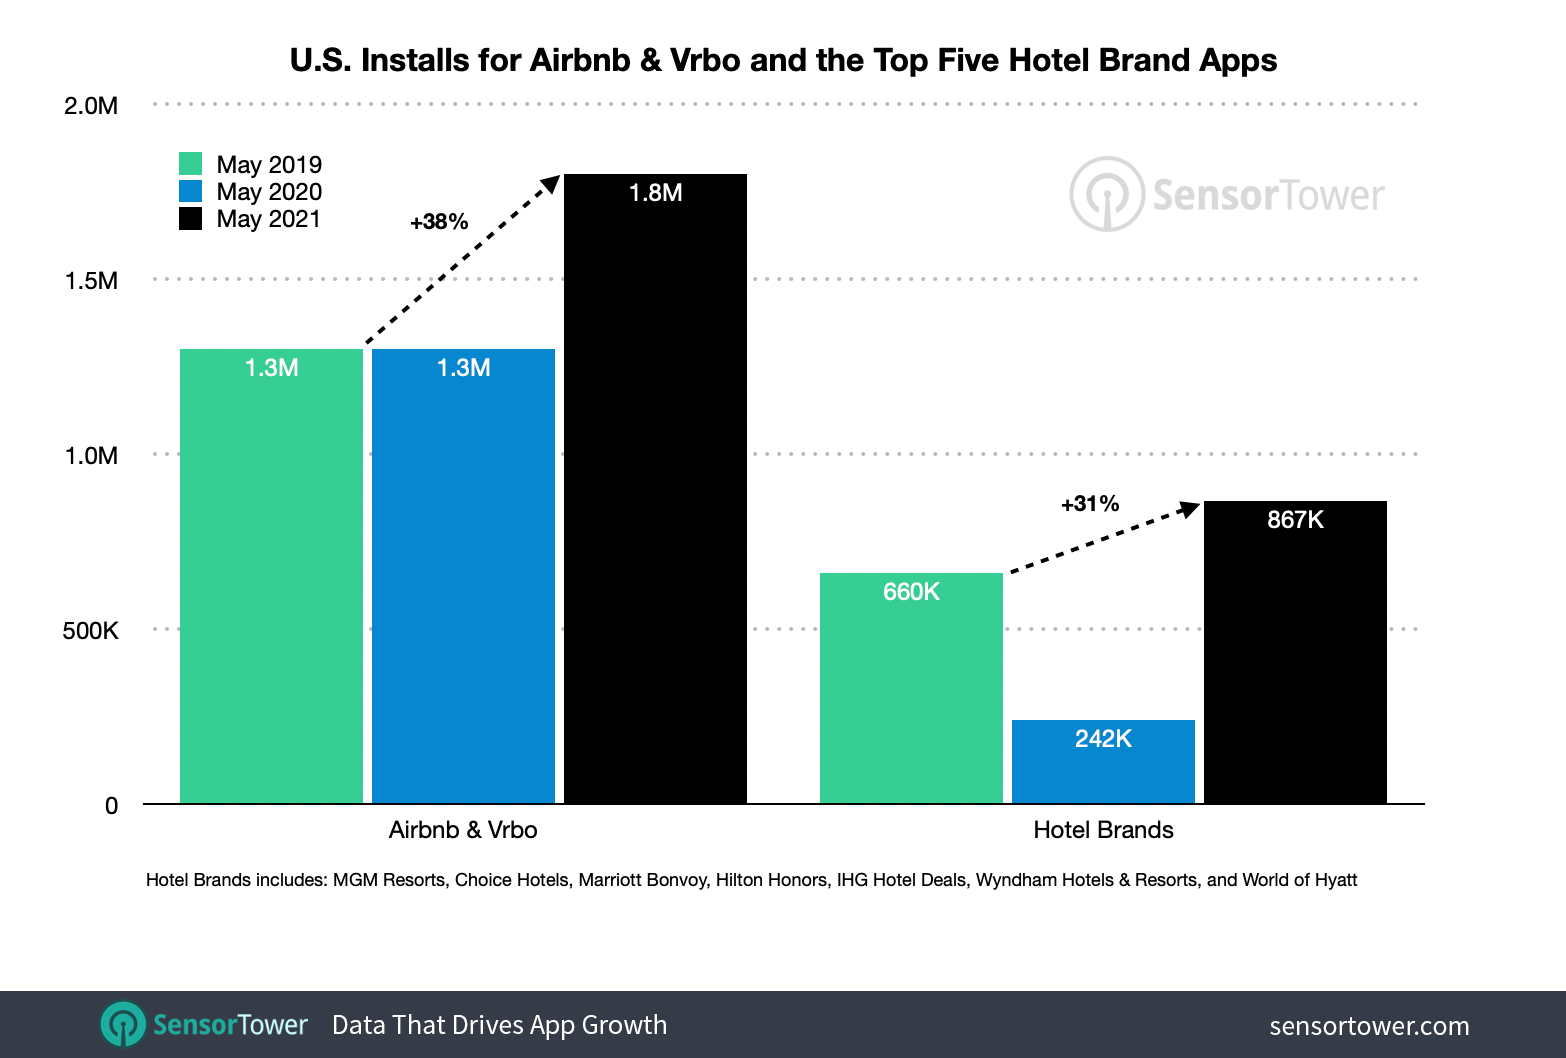 Airbnb and Vrbo collectively saw their installs grow 38 percent year-over-year in May to 1.8 million downloads in the U.S.